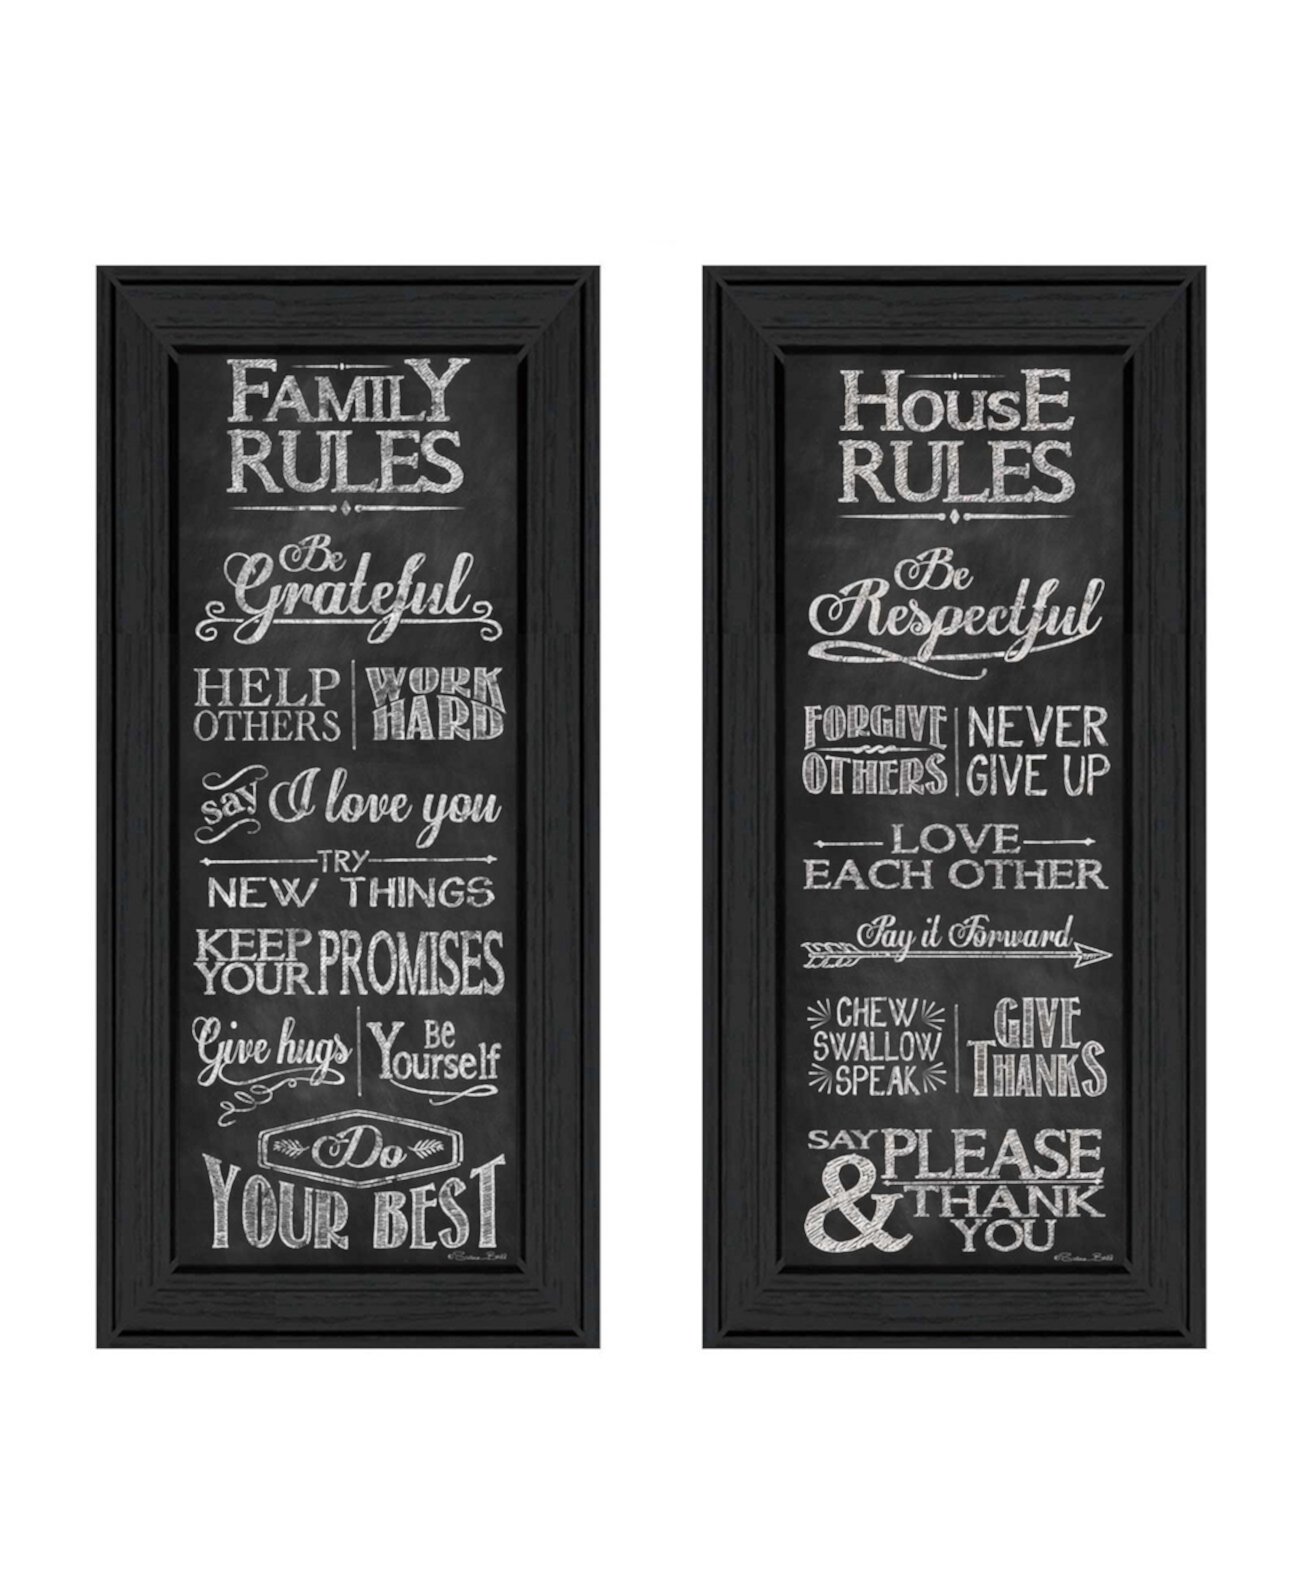 Rule collection. House Rules. Family Rules. House Rules Template. Family Rules by BLACKSHEEPOVCA.